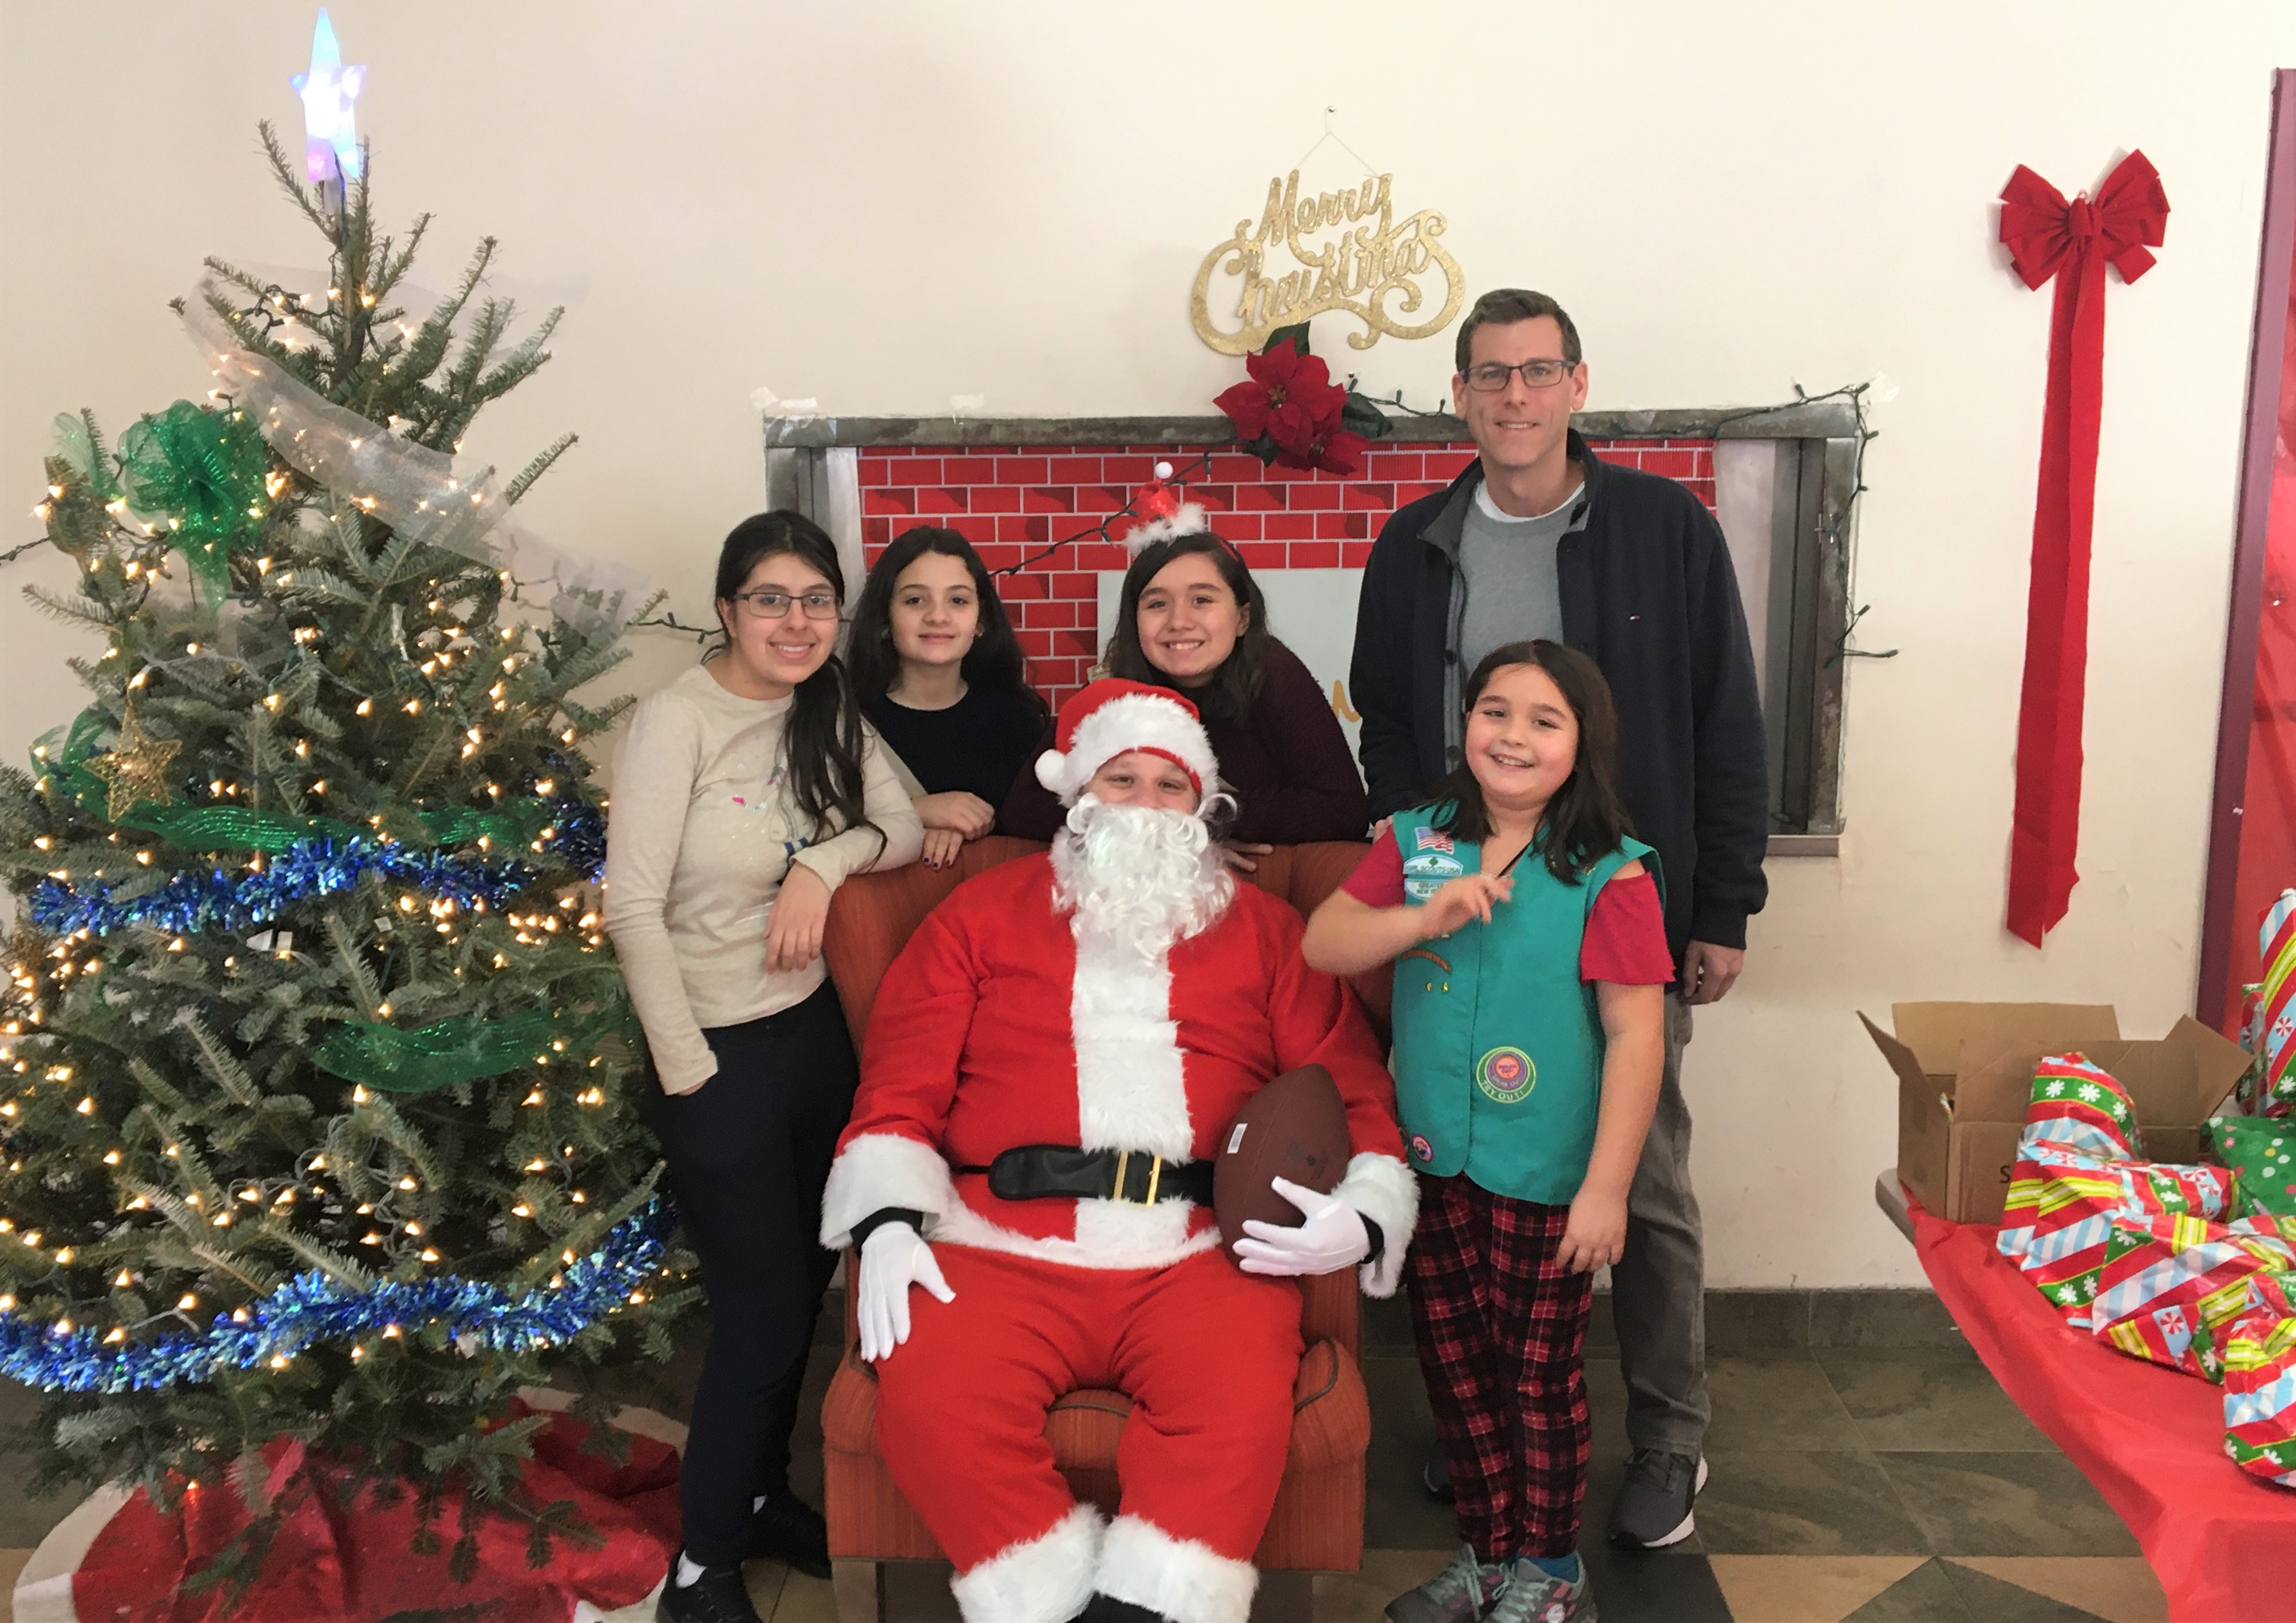 Assemblyman Braunstein is pictured with Santa and members of Girl Scout Troops 4076 and 4102 at the Belt Park Family Shelter on December 22, 2019.